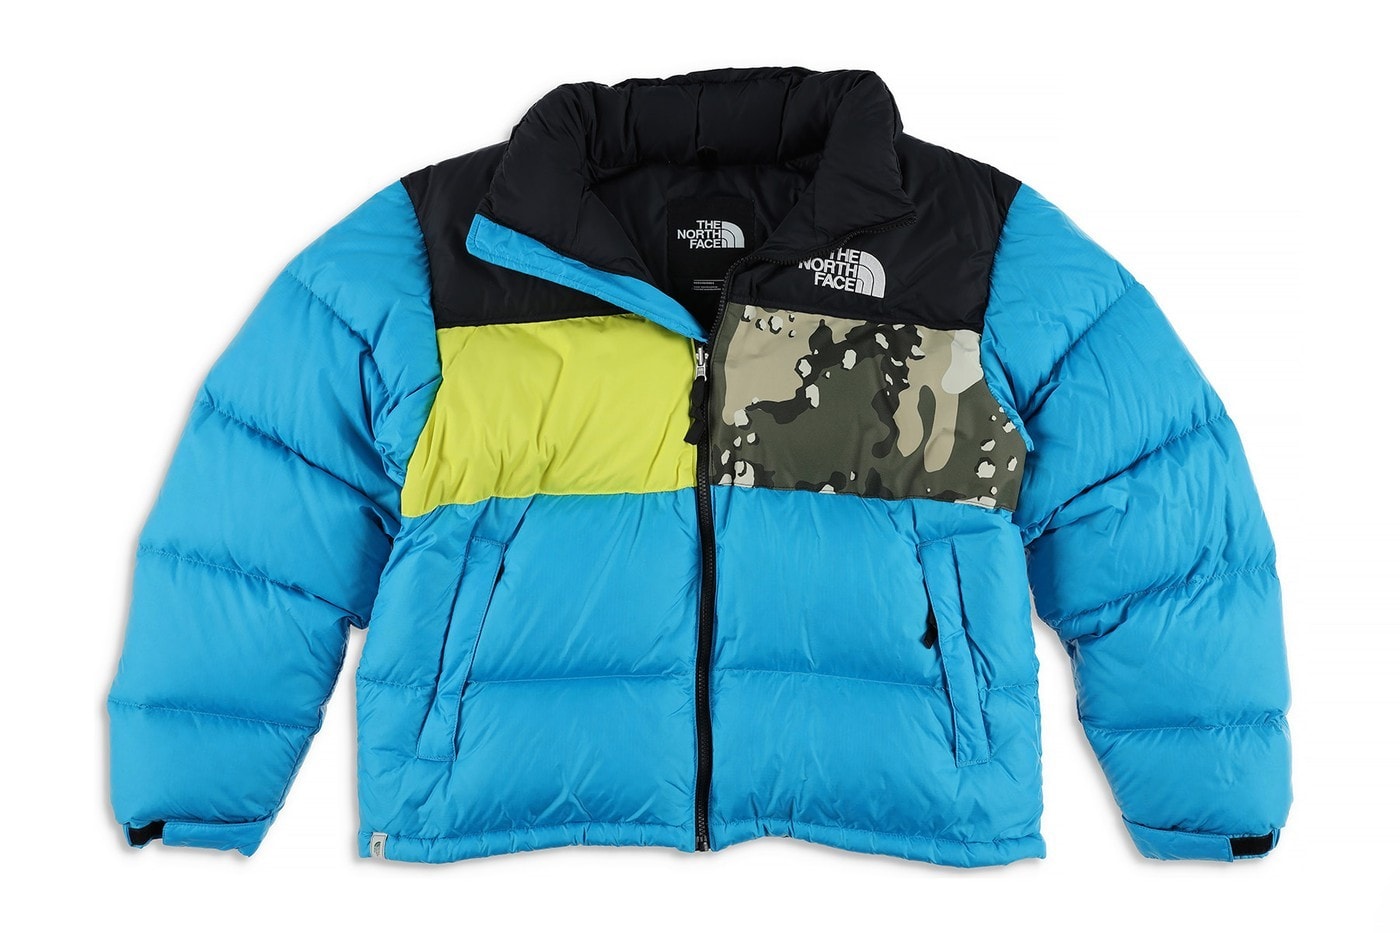 The North Face 旧品再制系列「Remade Collection」释出多款羽绒外套